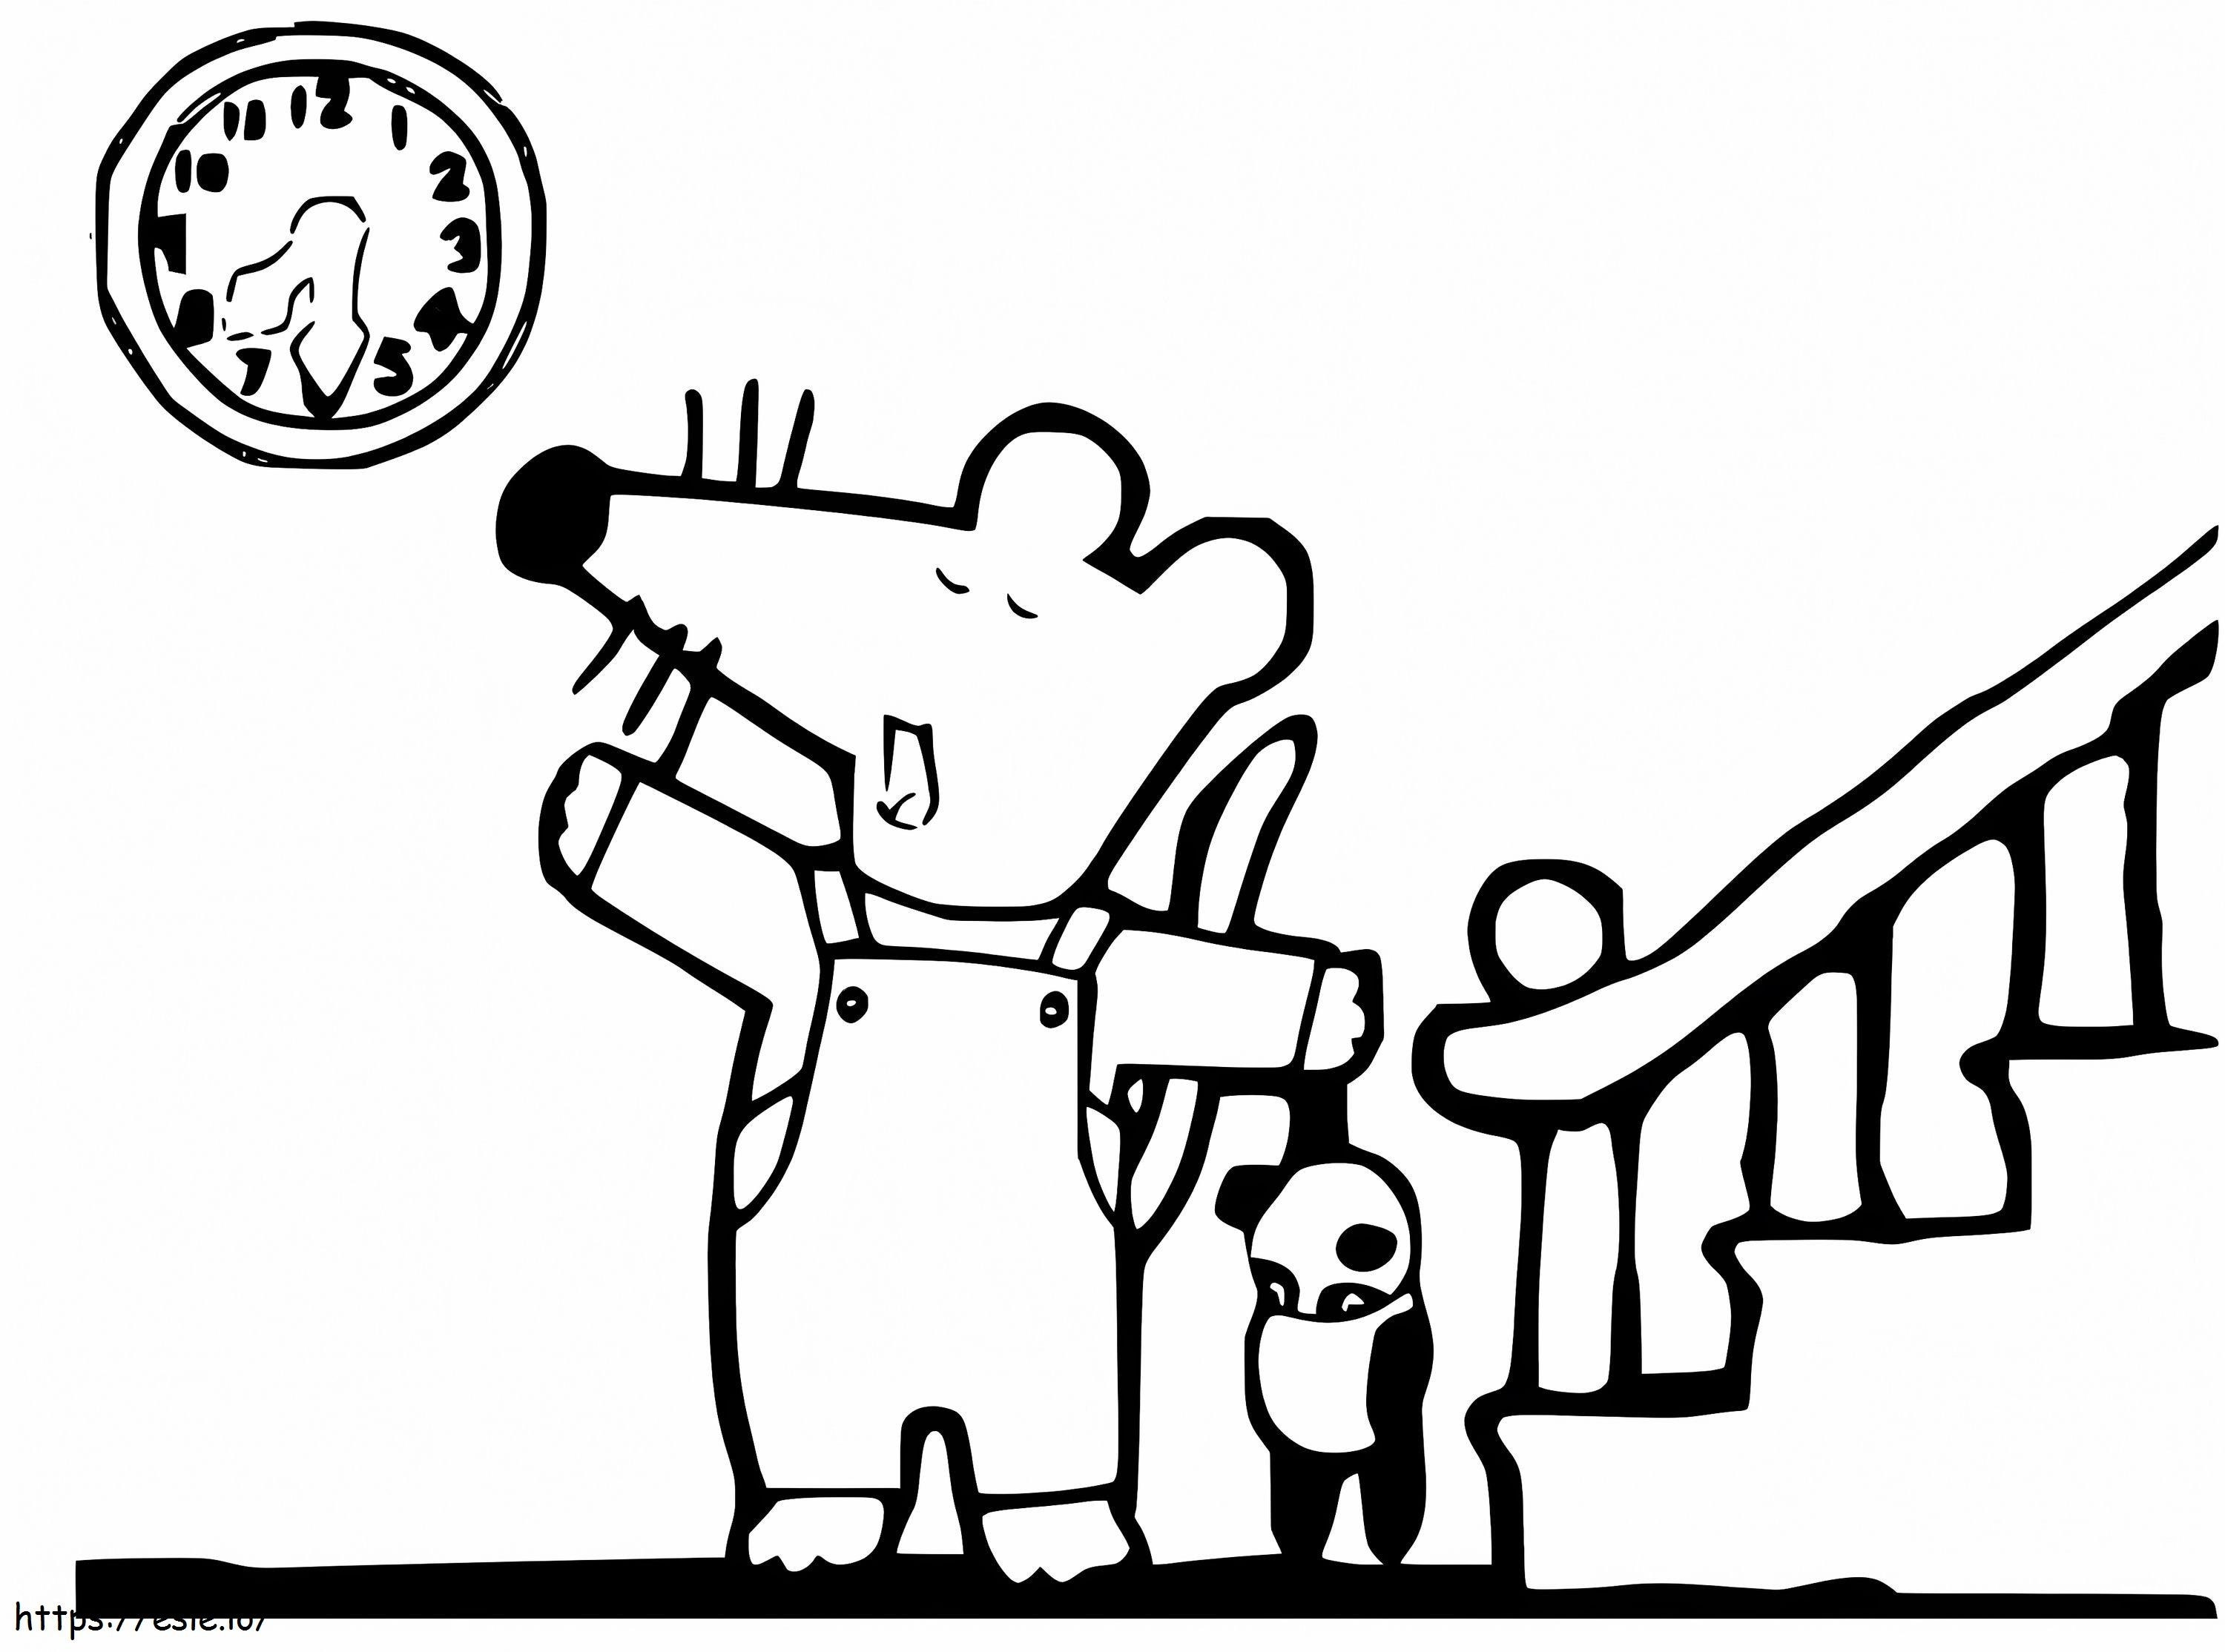 Maisy Wakes Up coloring page